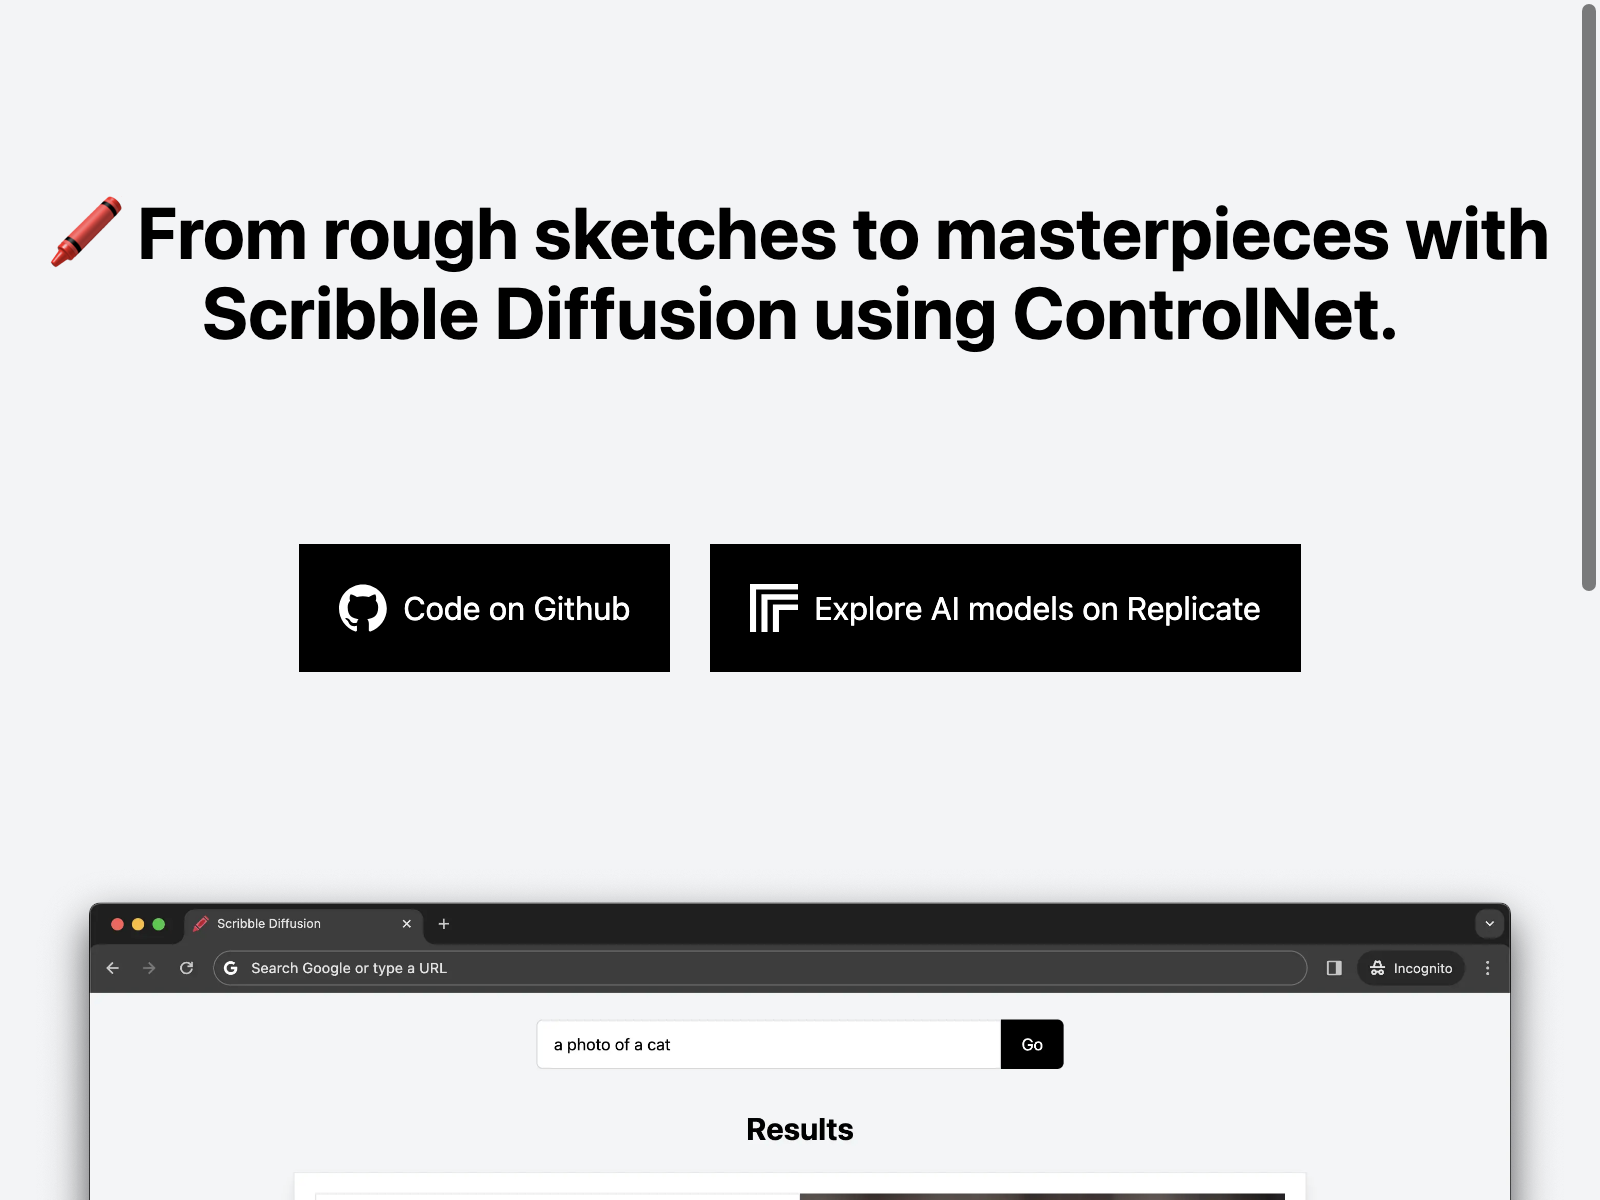 scribble diffusion Review: Pros, Cons, Alternatives